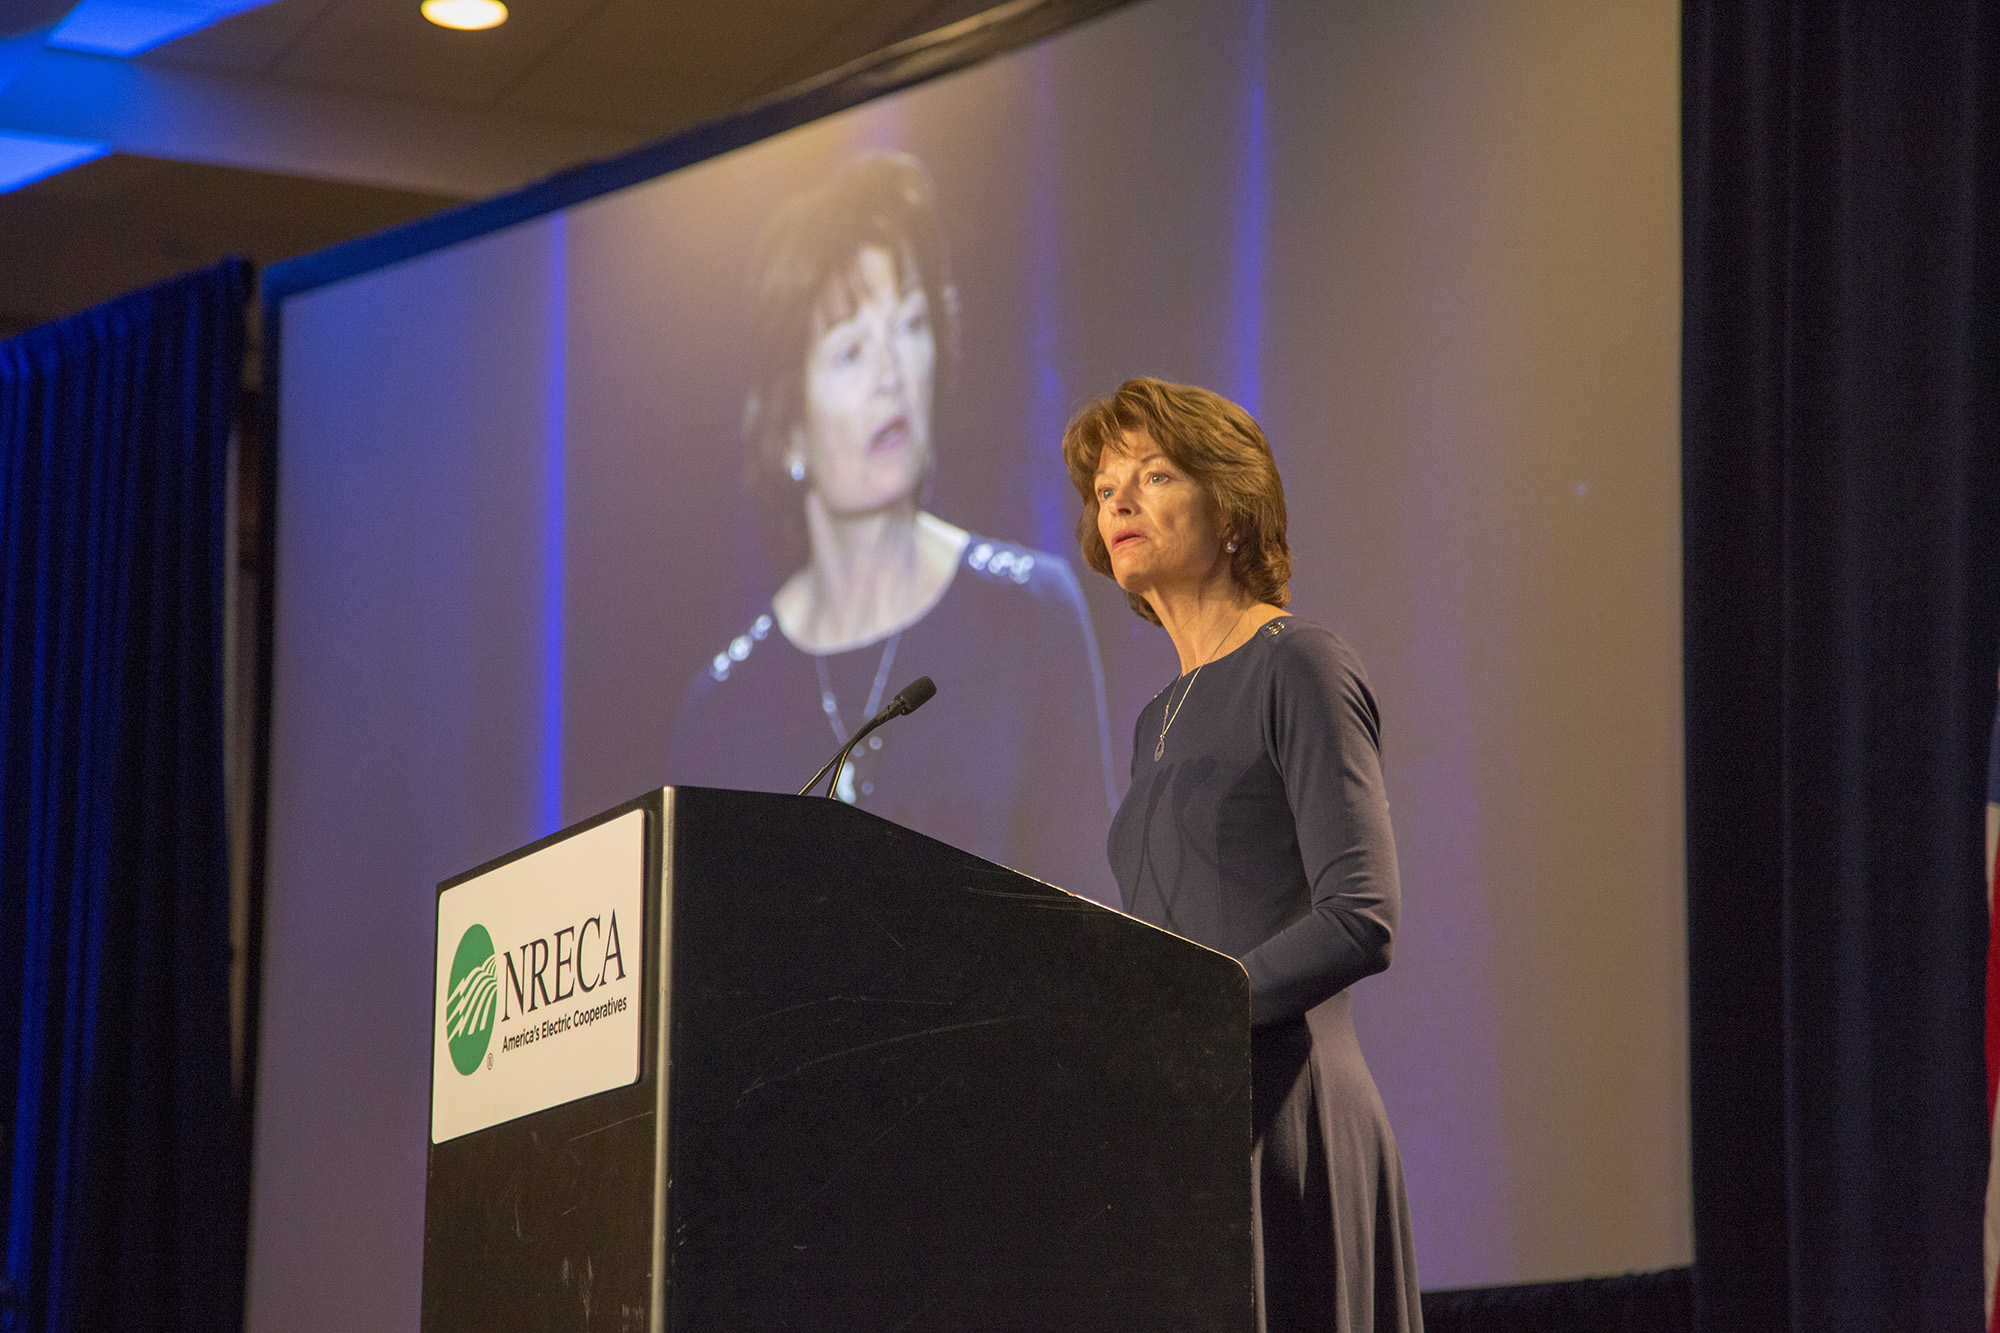 Senate Energy and Natural Resources Committee Chairwoman Lisa Murkowski, R-Alaska, lauds co-op innovation at NRECA’s 2018 Legislative Conference. (Photo By: Denny Gainer)